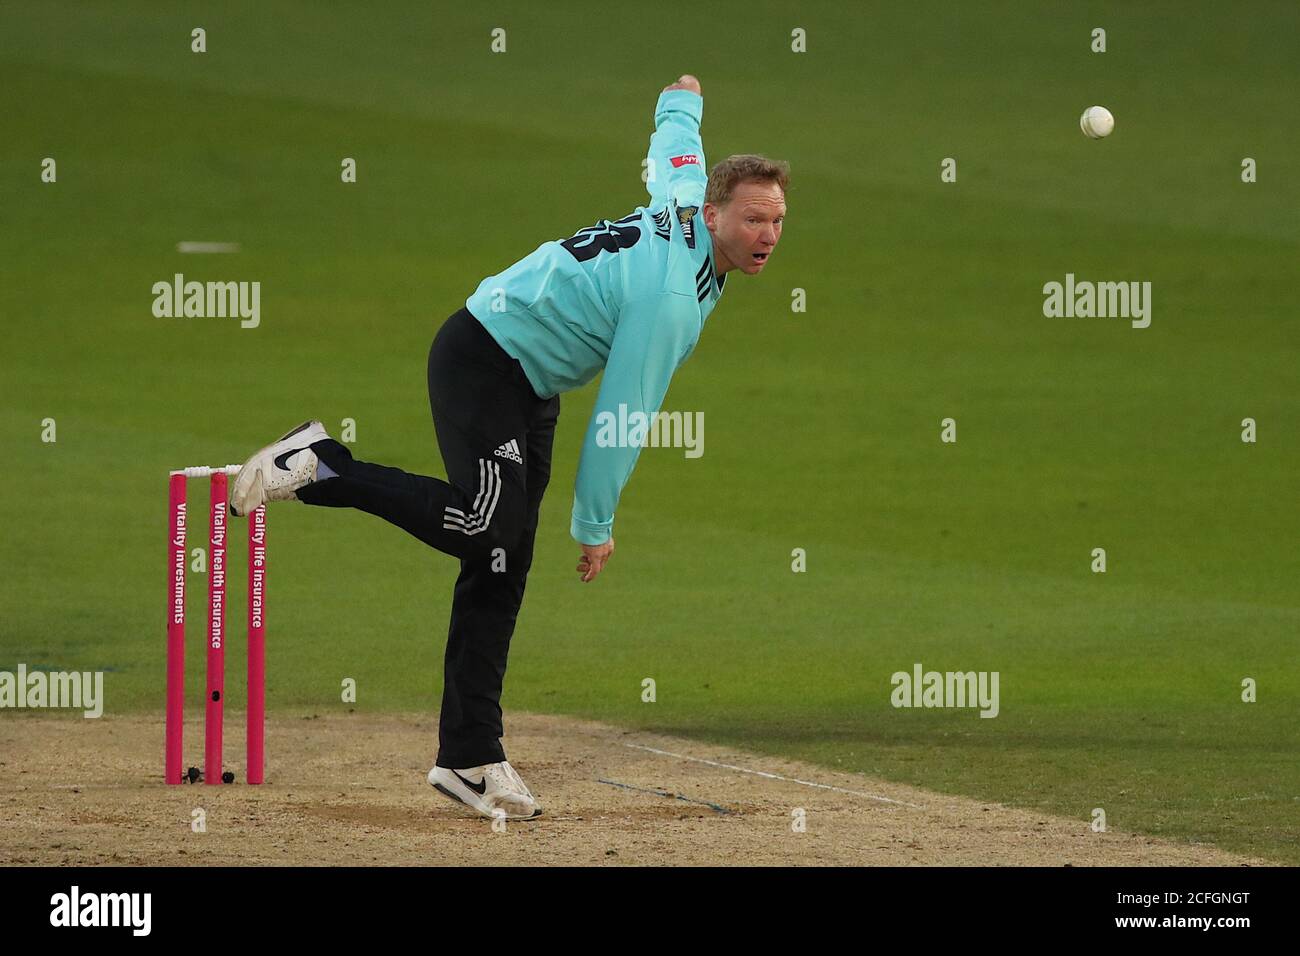 London, UK. 05th Sep, 2020. LONDON, ENGLAND. SEPTEMBER 05 2020: Gareth Batty of Surrey bowling during the Vitality Blast T20 match between Surrey and Middlesex, at The Kia Oval, Kennington, London, England. On the 5th September 2020. (Photo by Mitchell Gunn/ESPA-Images) Credit: European Sports Photo Agency/Alamy Live News Stock Photo